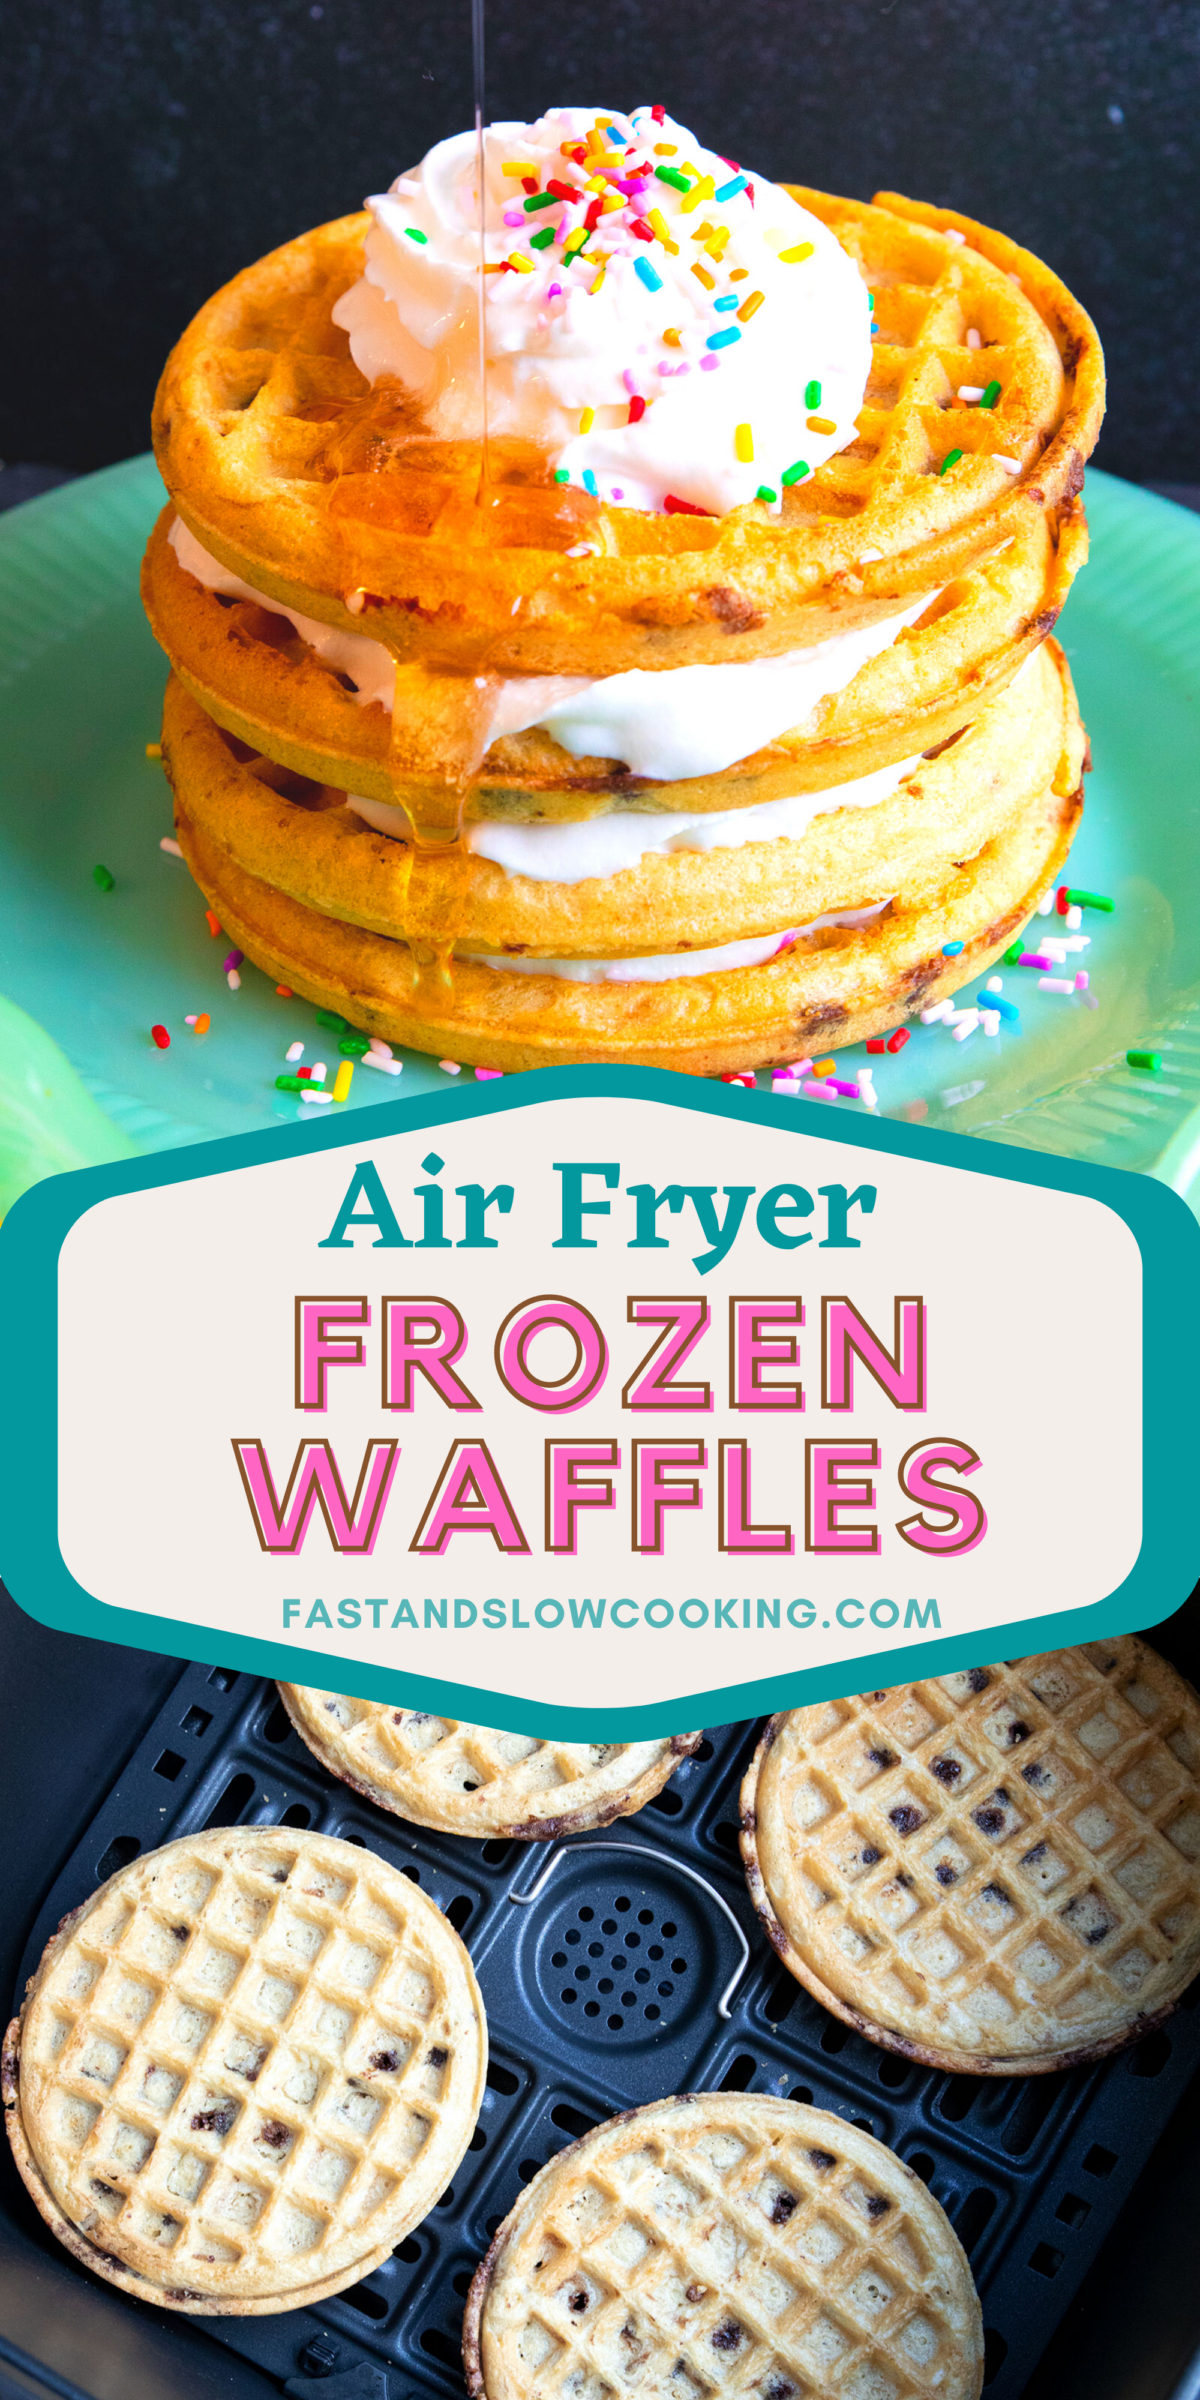 How to cook frozen waffles in your air fryer! The air fryer crisps them up evenly in 5 minutes, making them the perfect weekday OR weekend breakfast
